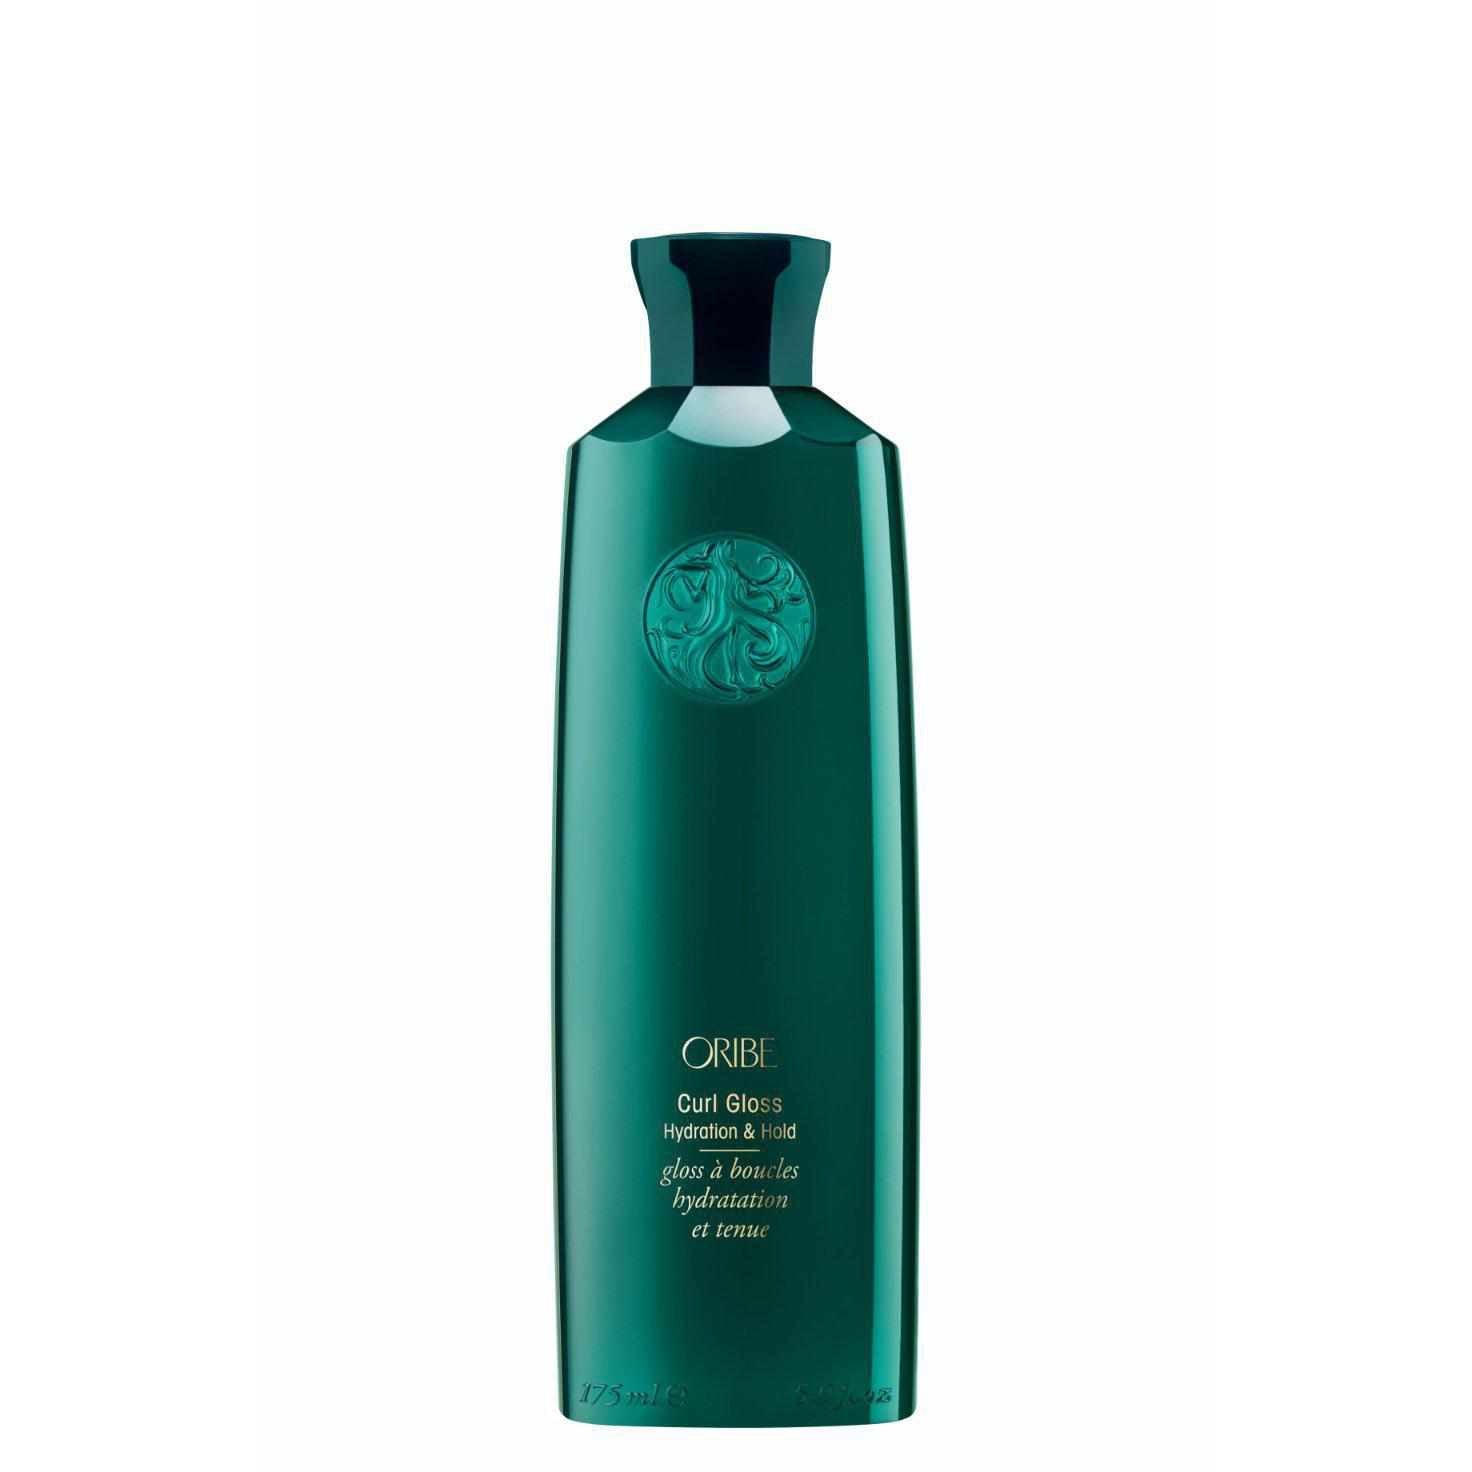 luxury_haircare_Oribe_haircare_1065_Curl_Gloss_Hydration_and_Hold